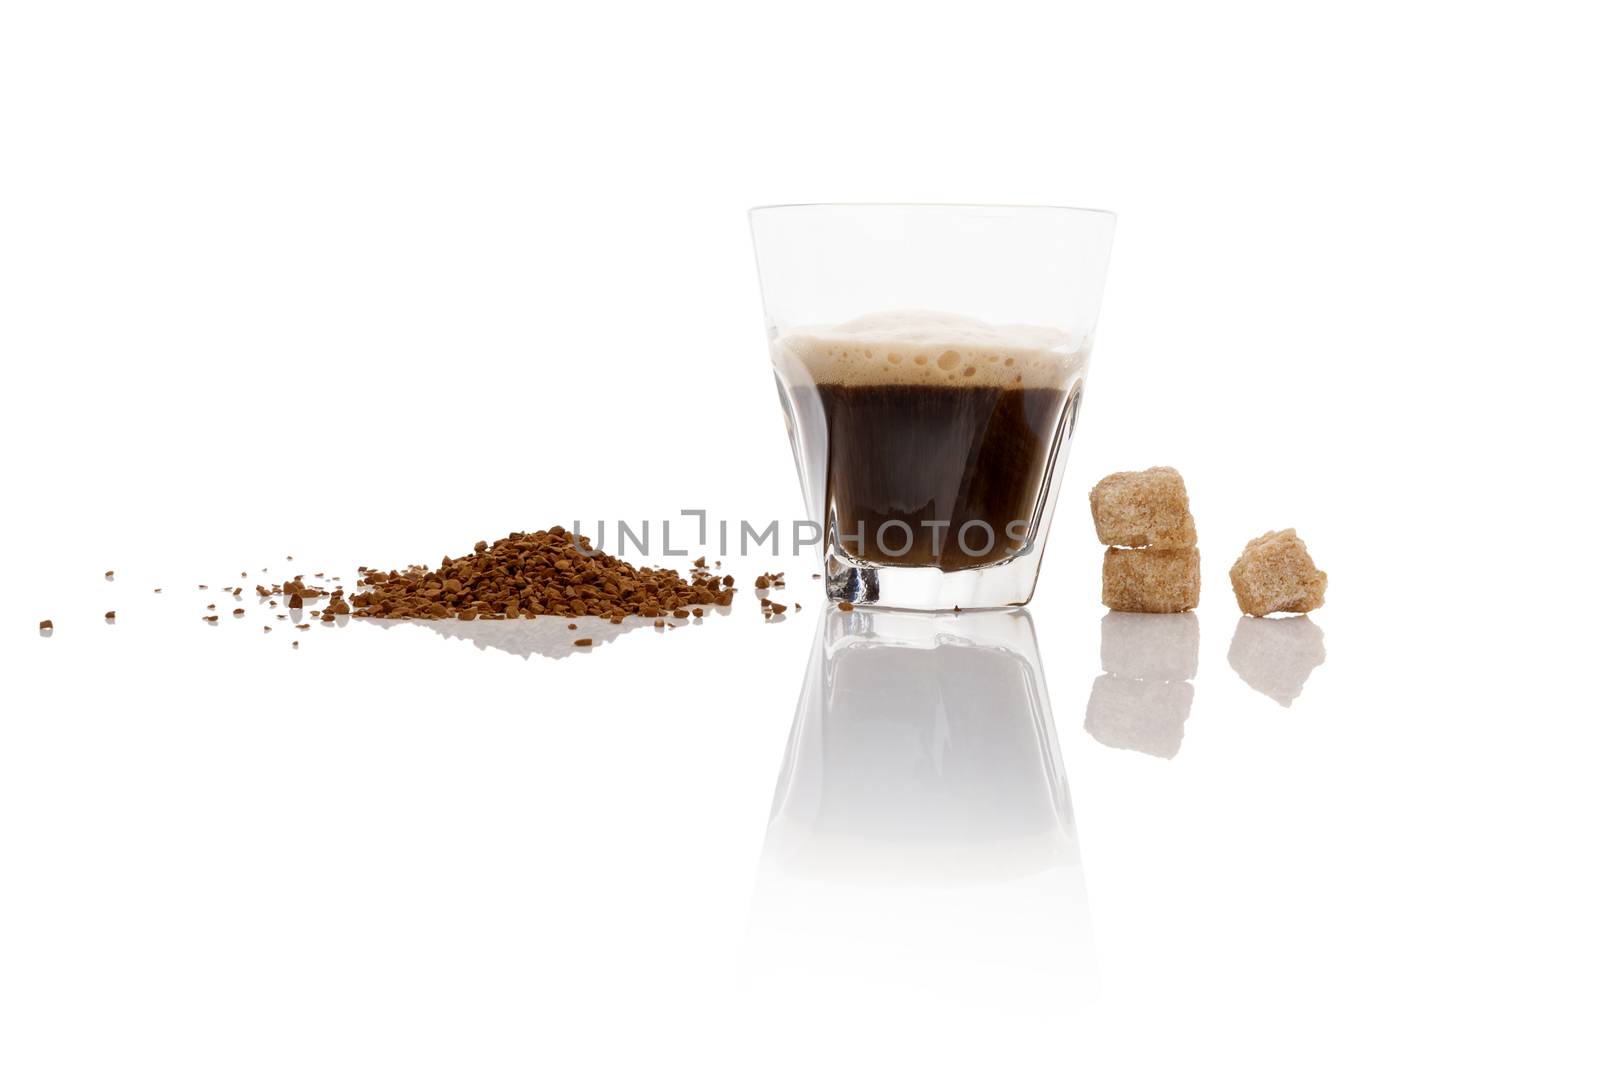 Instant coffee powder and delicious aromatic coffee in glass isolated on white background with reflection. Culinary coffee drinking. 